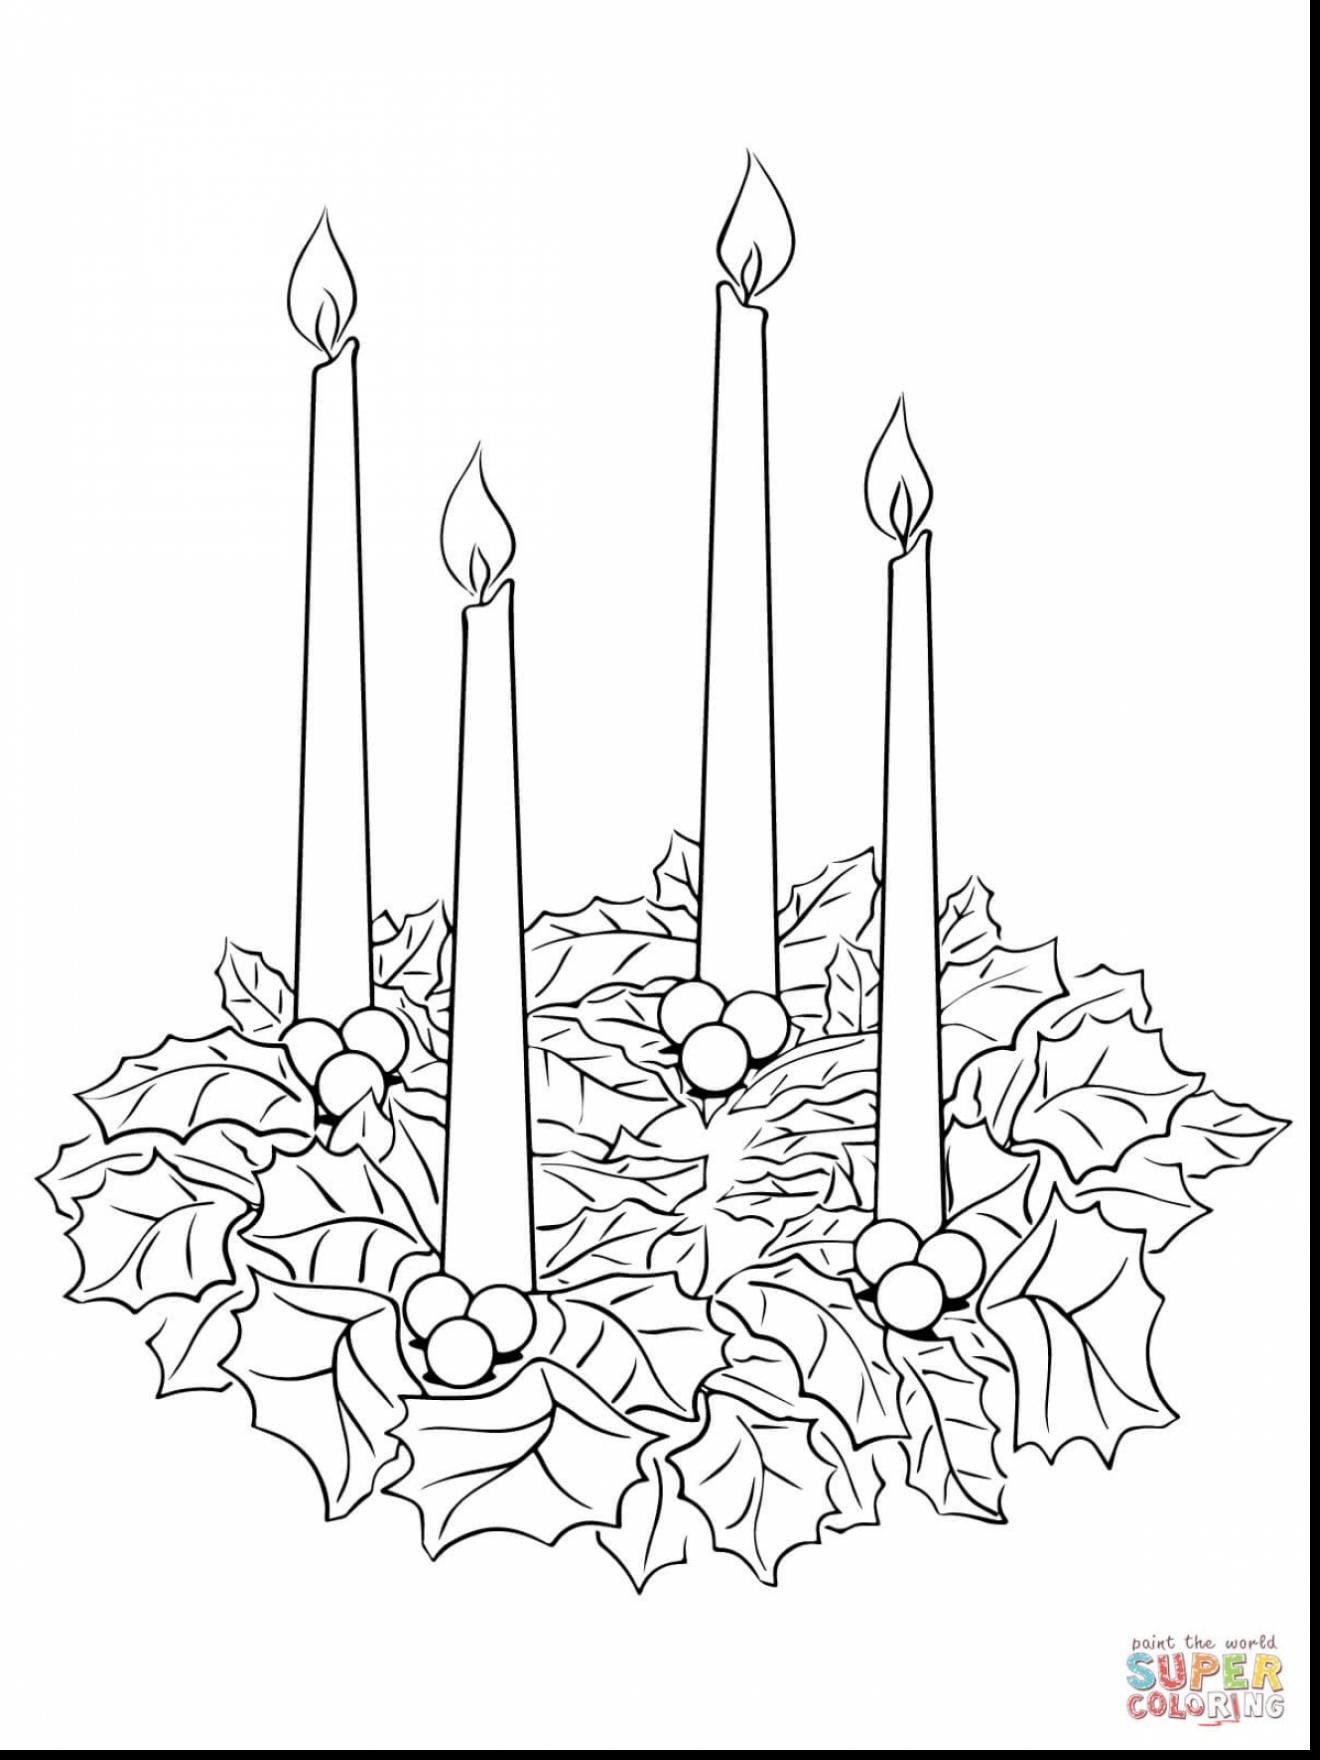 Advent Wreath Coloring Page at Free printable